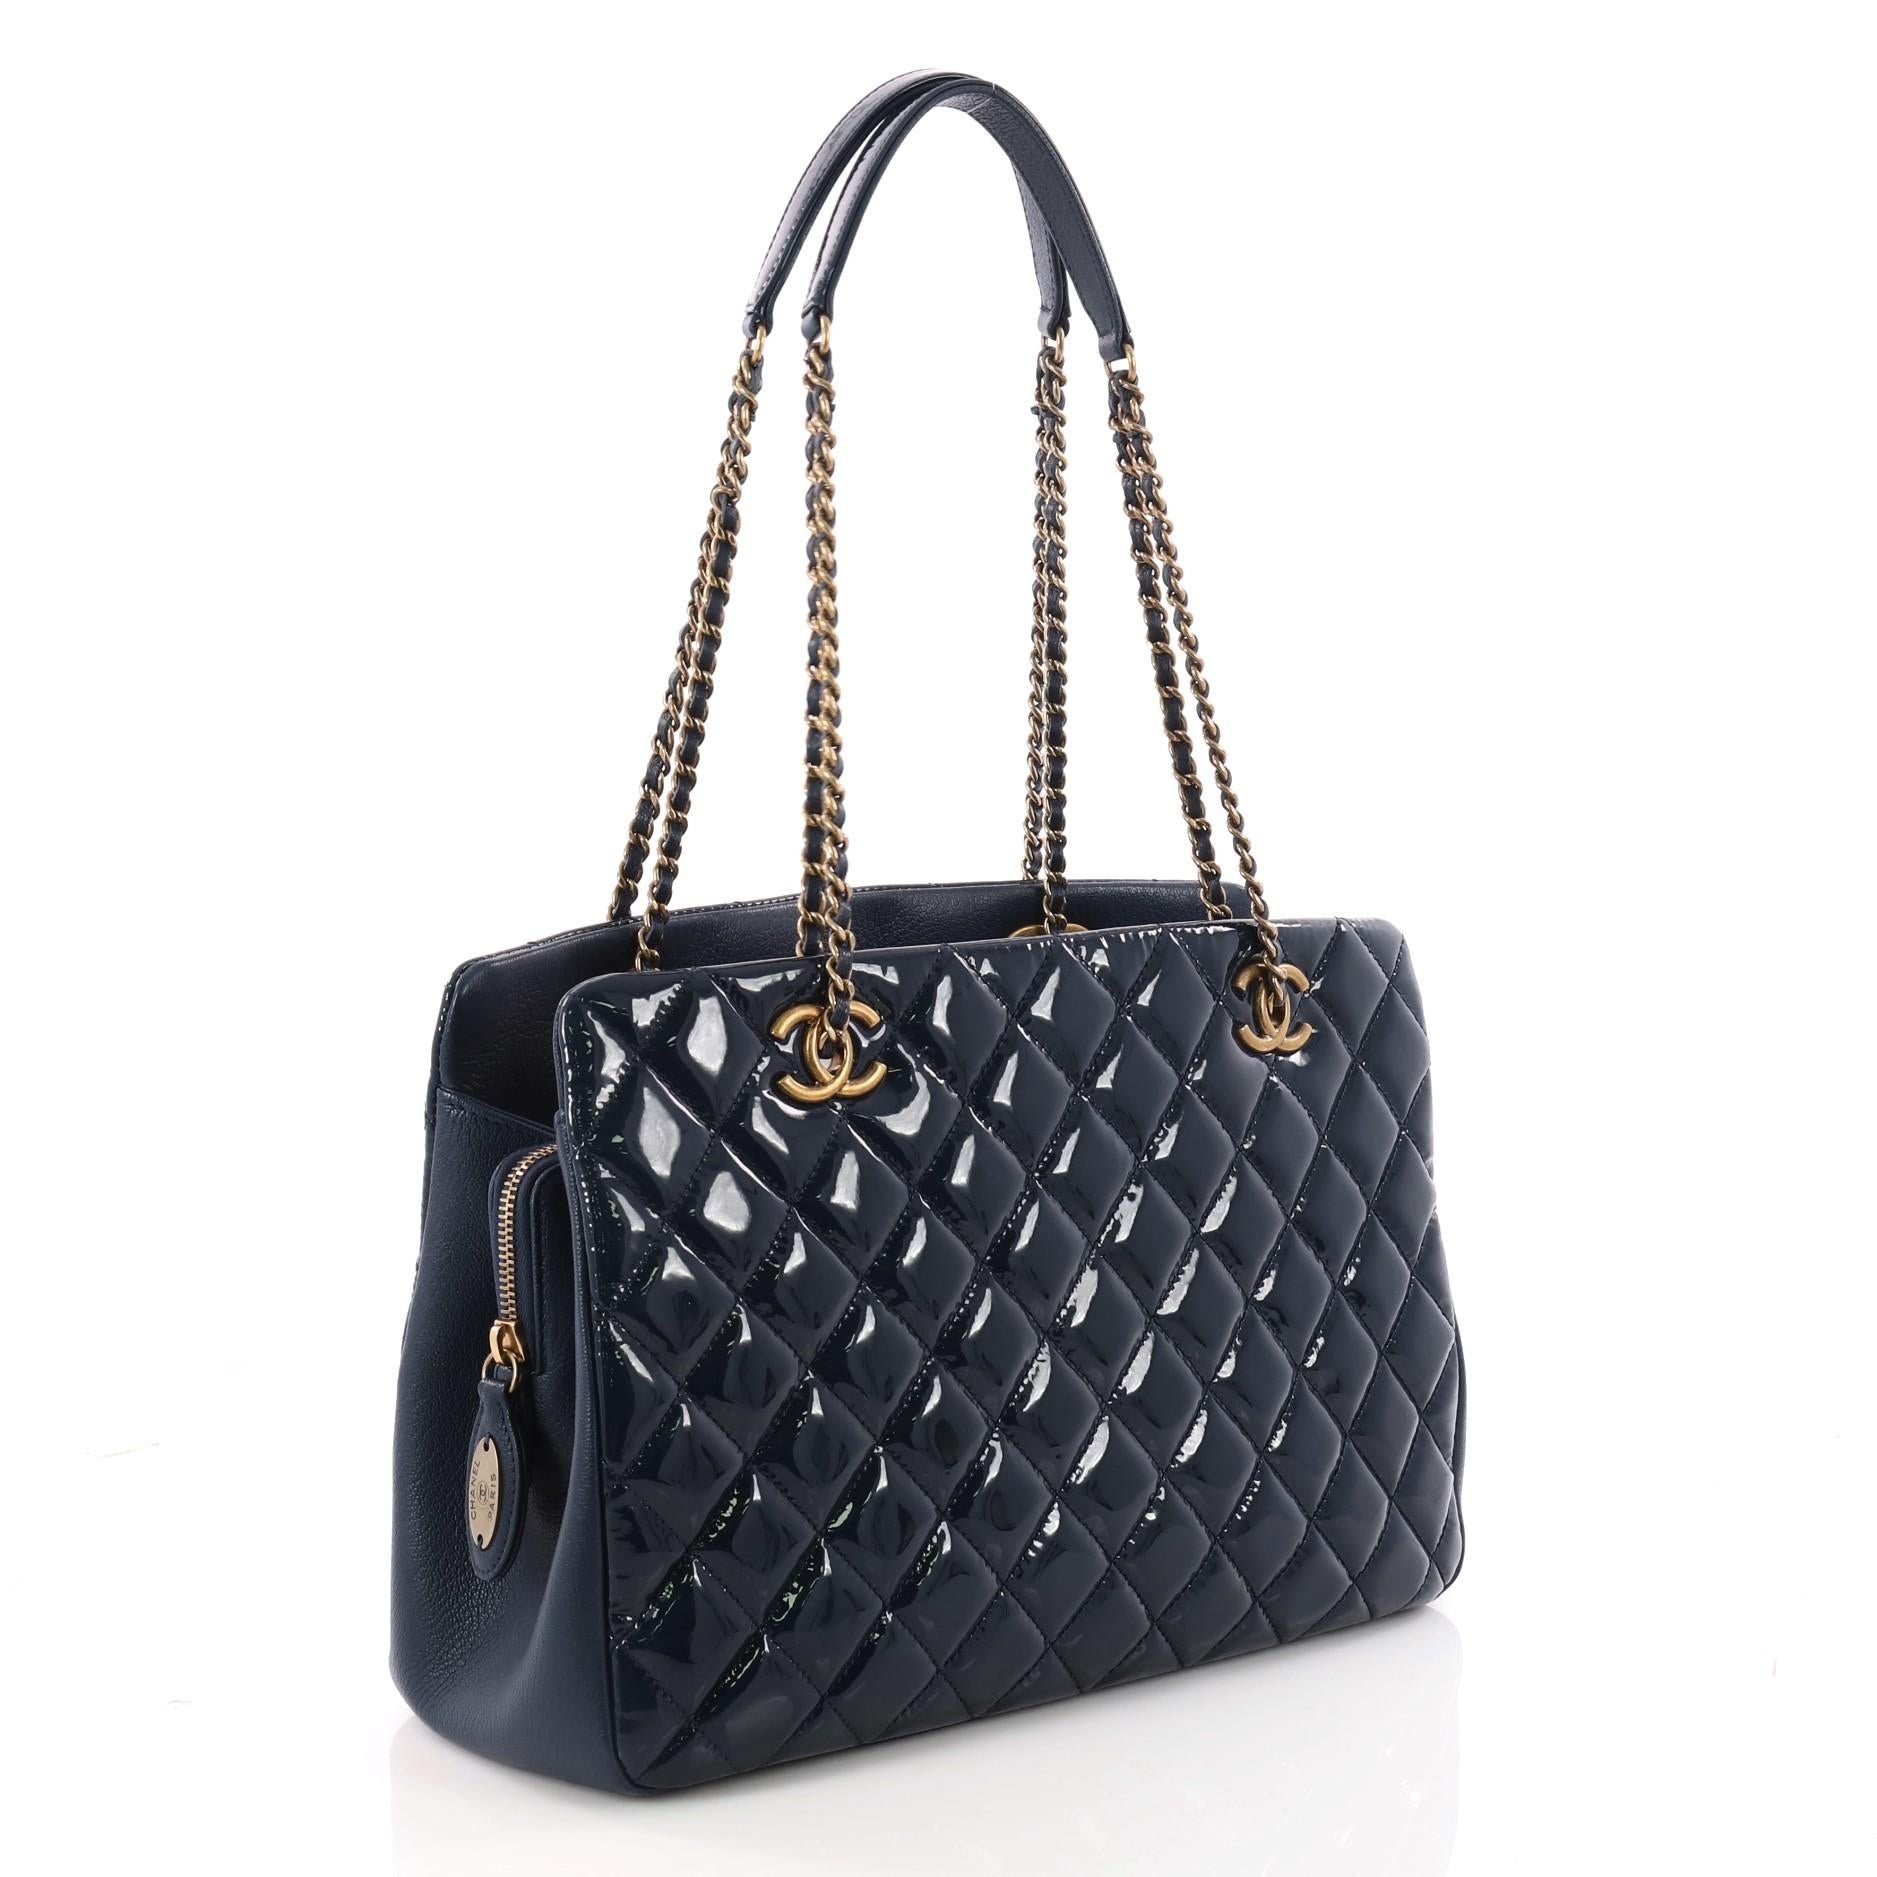 Black Chanel Eyelet Tote Quilted Patent Medium